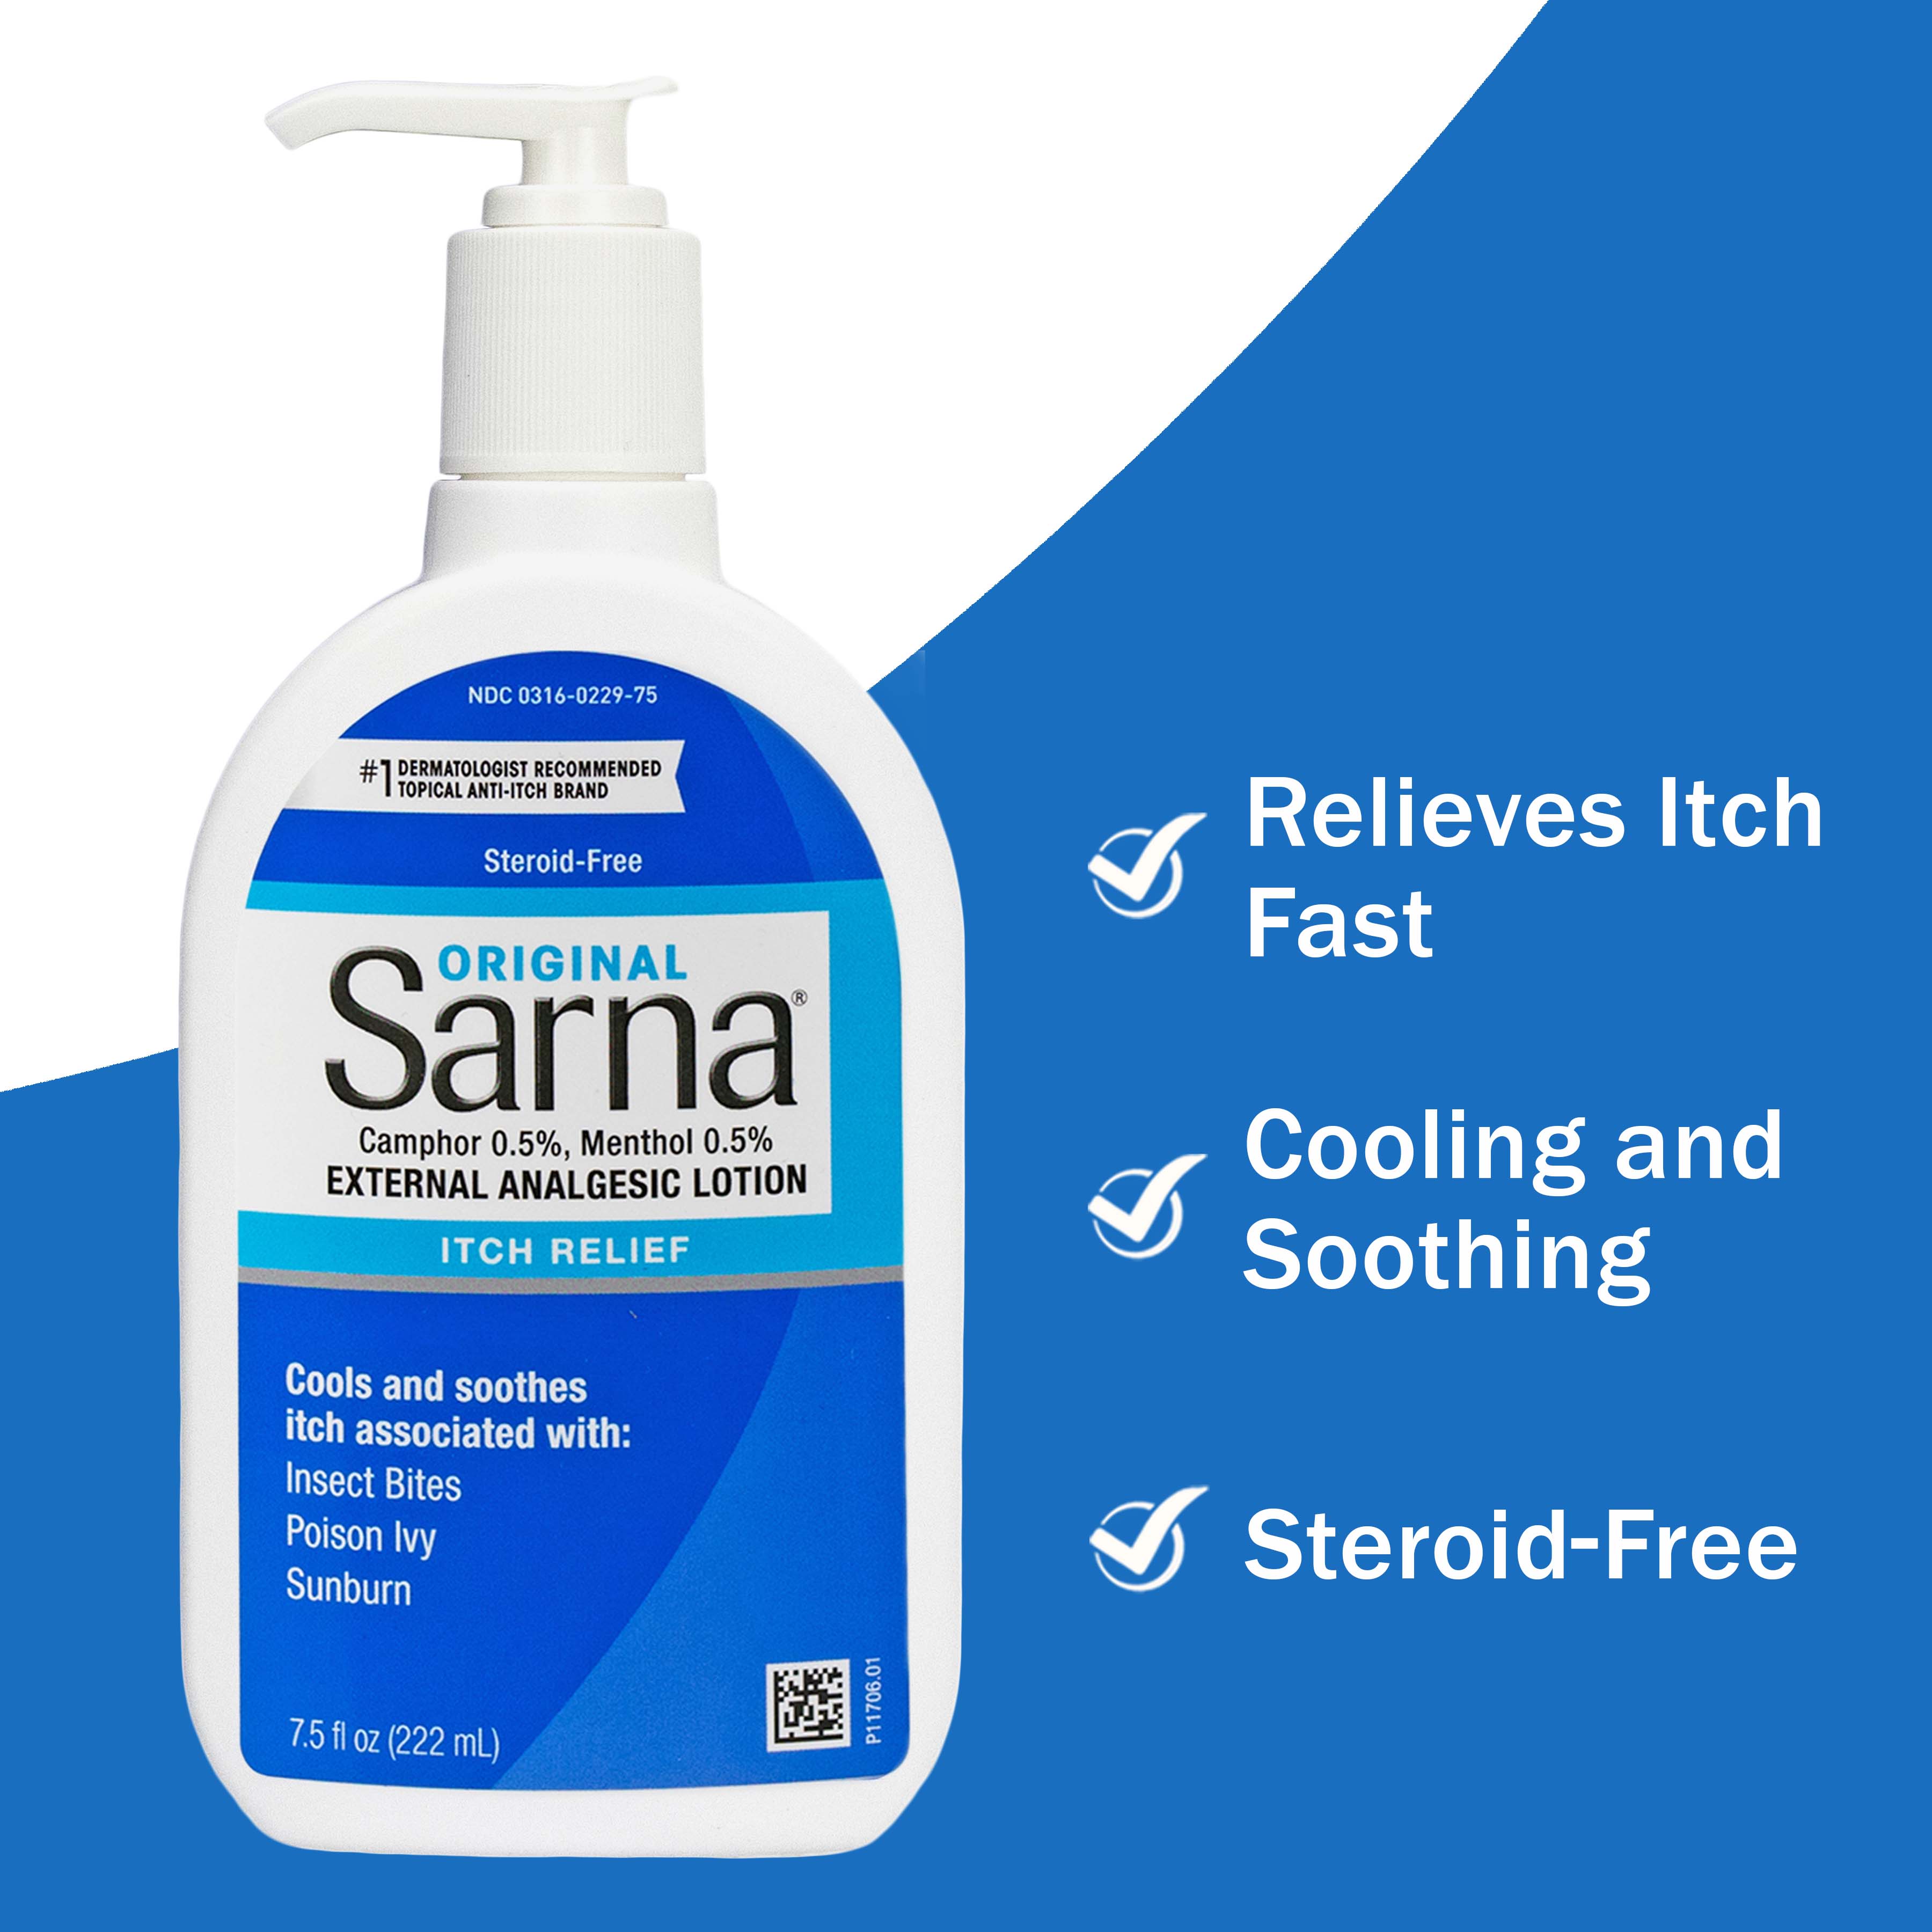 Sarna Original Steroid-Free Anti-Itch Cooling and Soothing Lotion, 7.5 oz - image 2 of 9